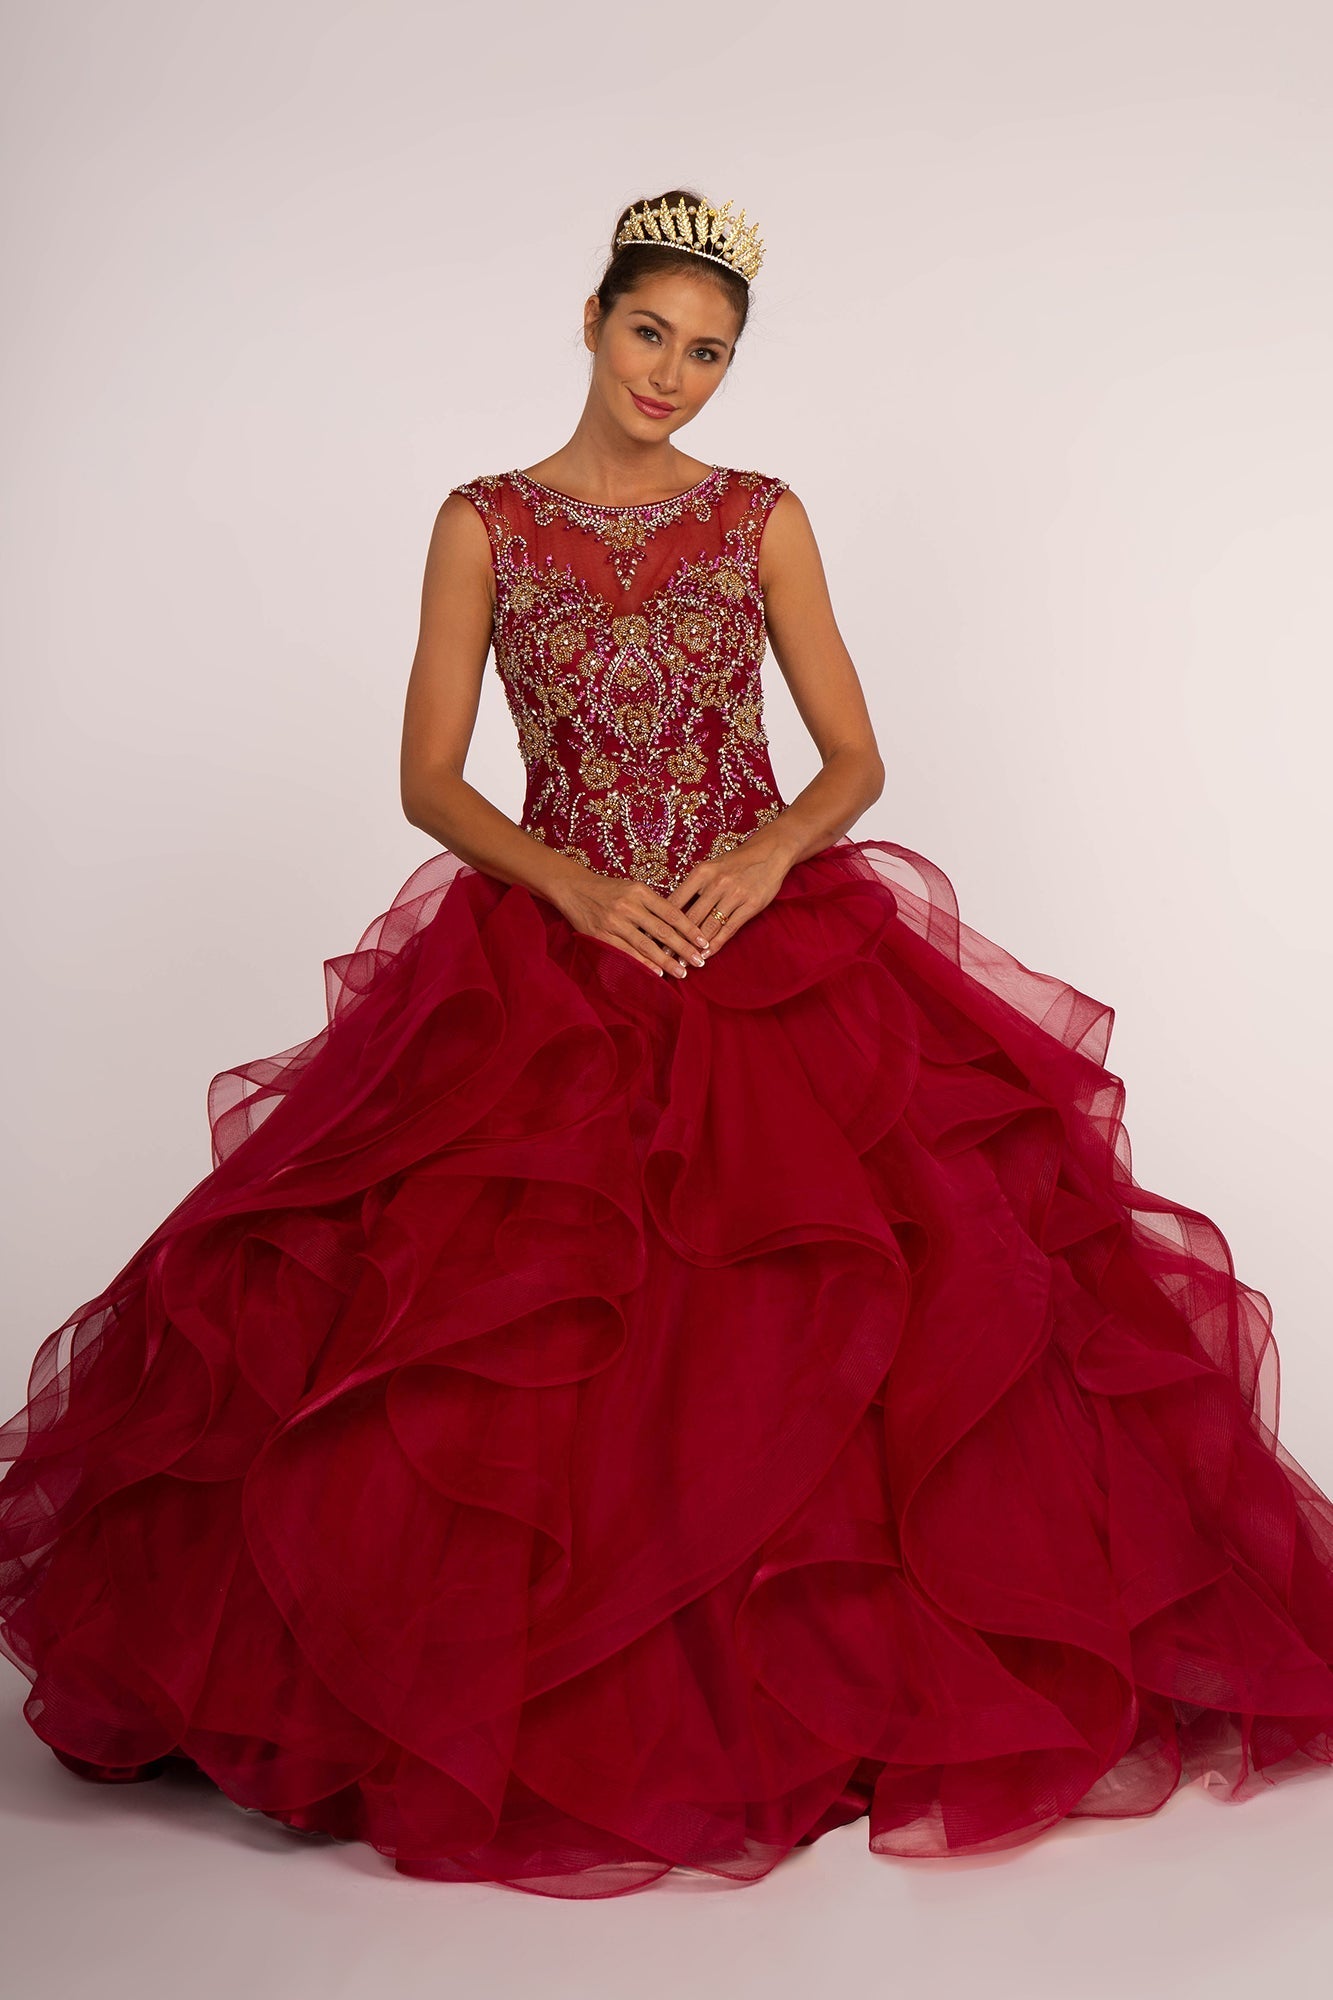 Beads Embellished Bodice Tulle Ball Gown Multi-Layered Ruffle Skirt GLGL2511 Elsy Style QUINCEANERA